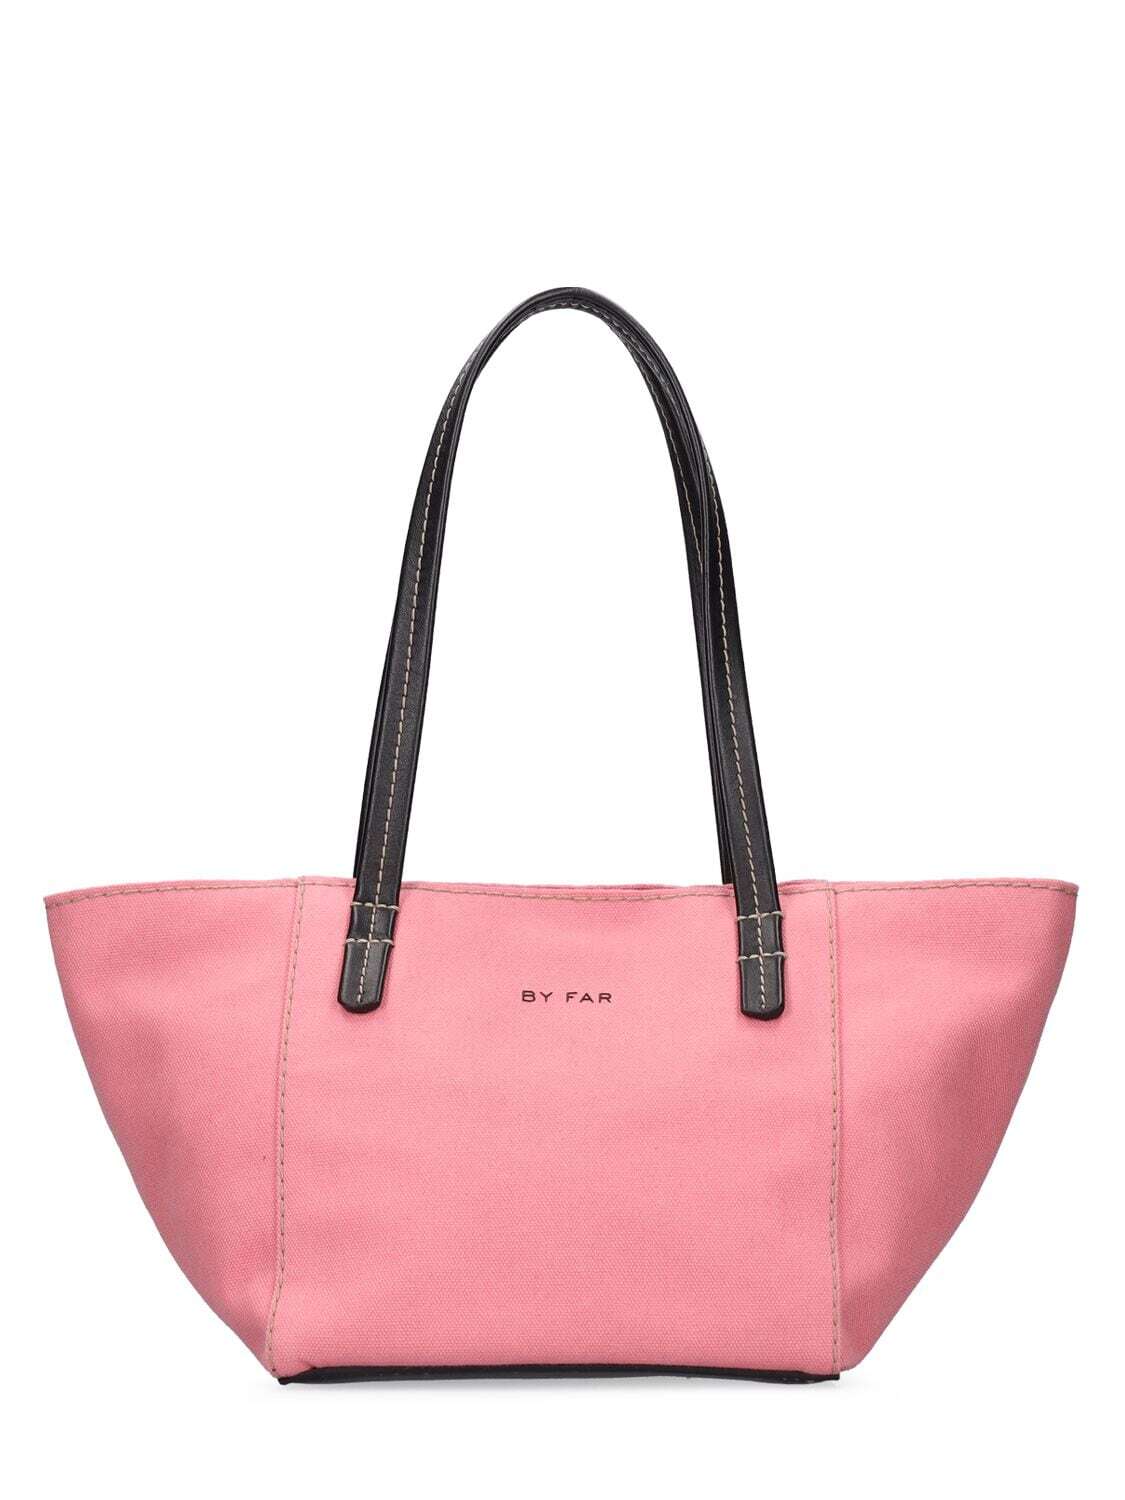 BY FAR Bar Canvas & Nappa Leather Tote Bag in pink